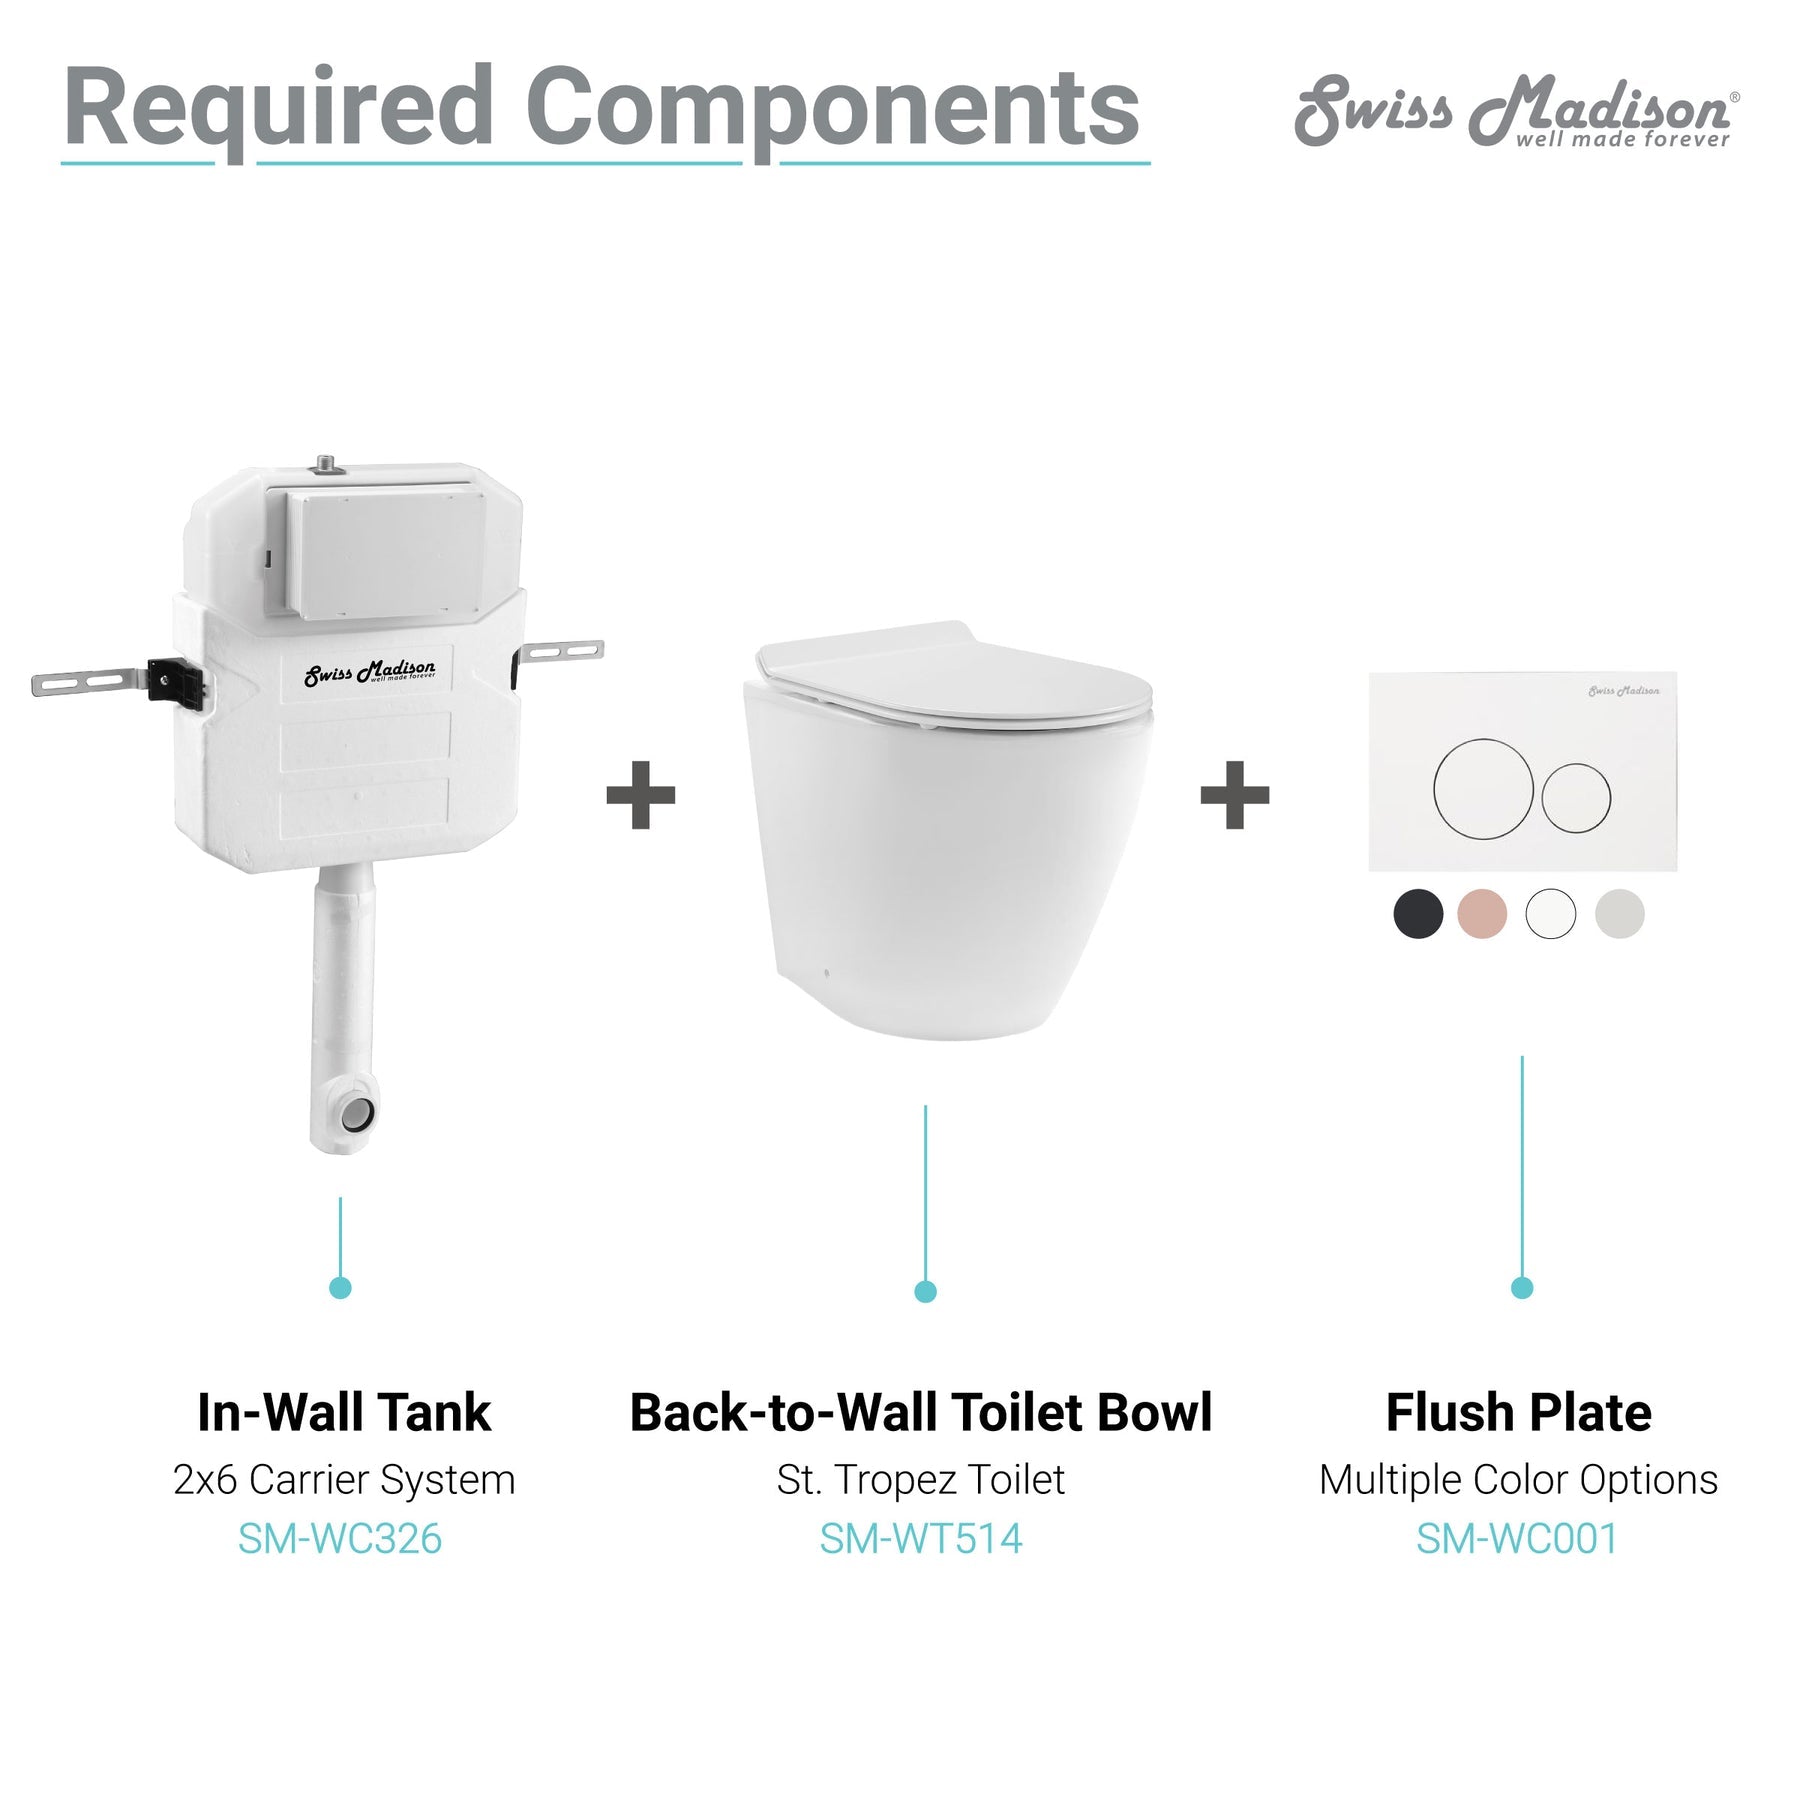 Swiss Madison 2x6 Concealed In-Wall Toilet Tank Carrier for Back-to-Wall Toilet - SM-WC326